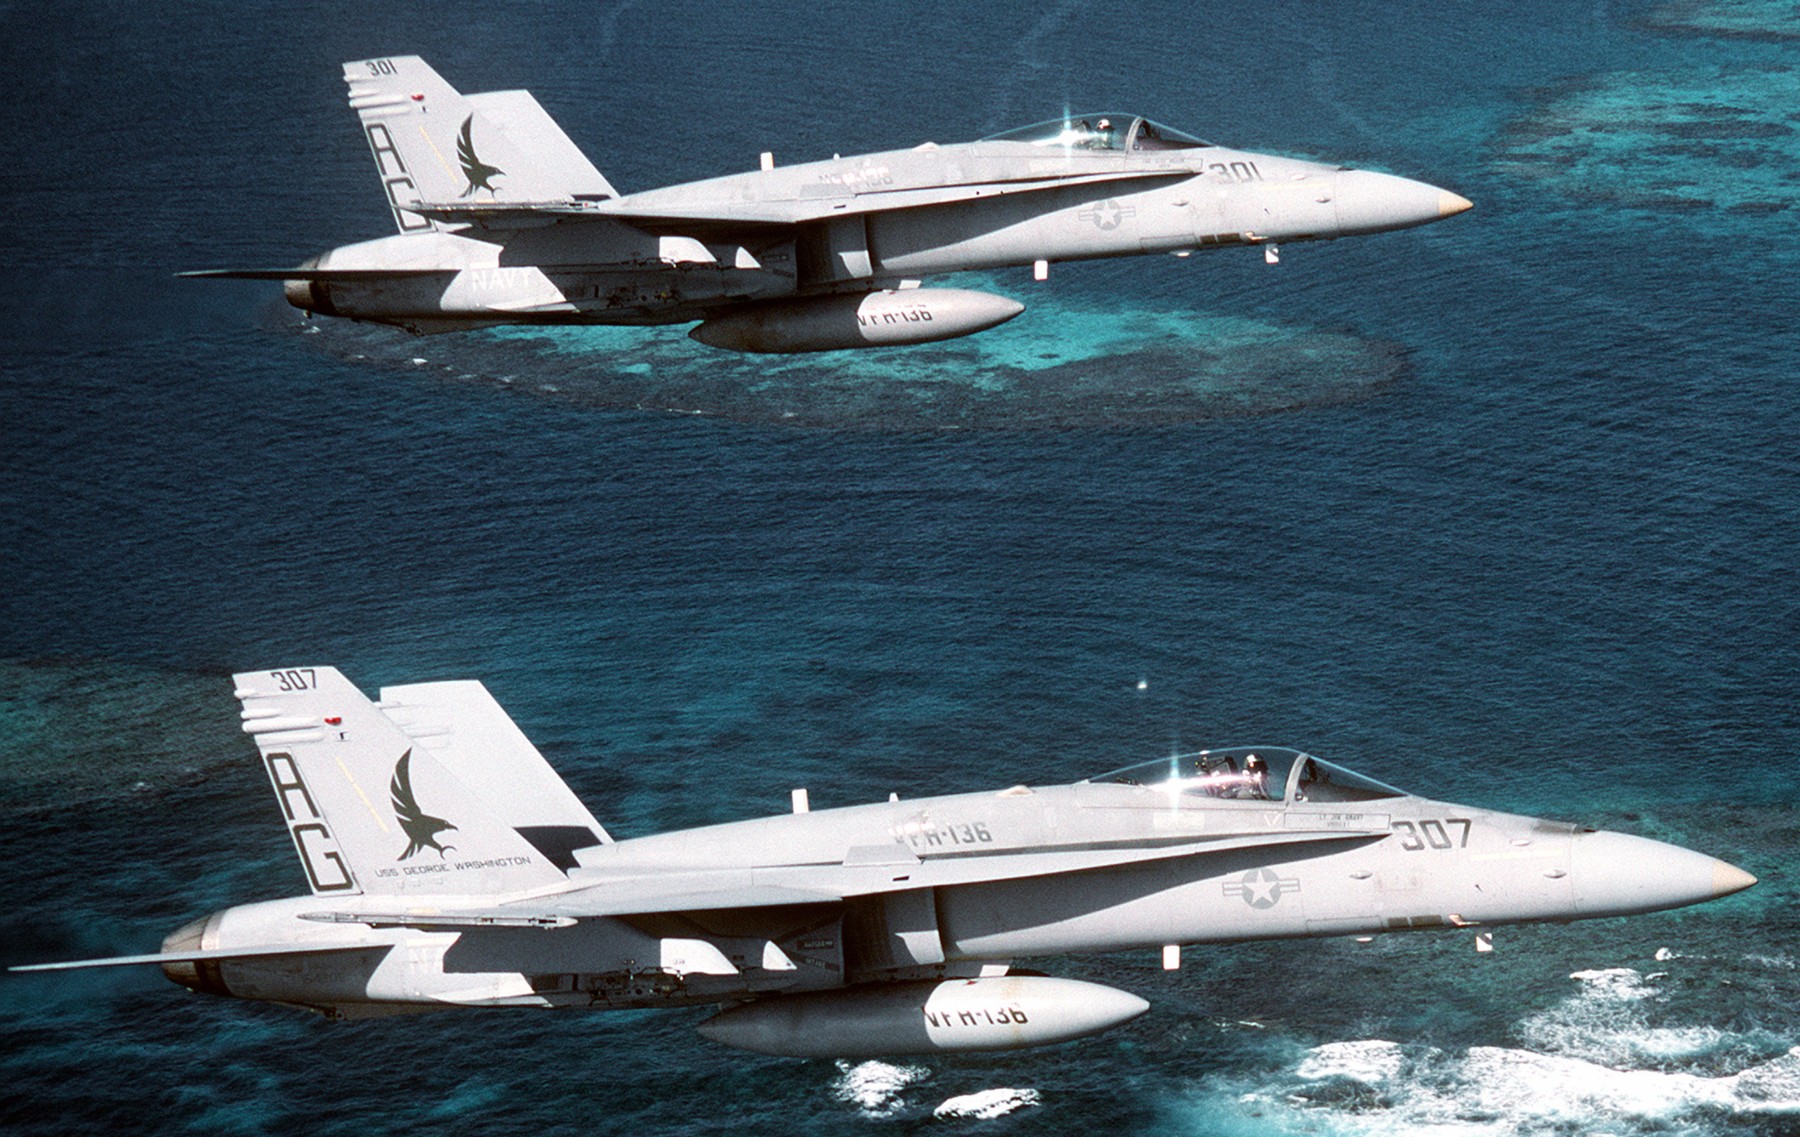 vfa-136 knighthawks strike fighter squadron f/a-18c hornet 1992 76 cvw-7 naval station roosevelt roads puerto rico